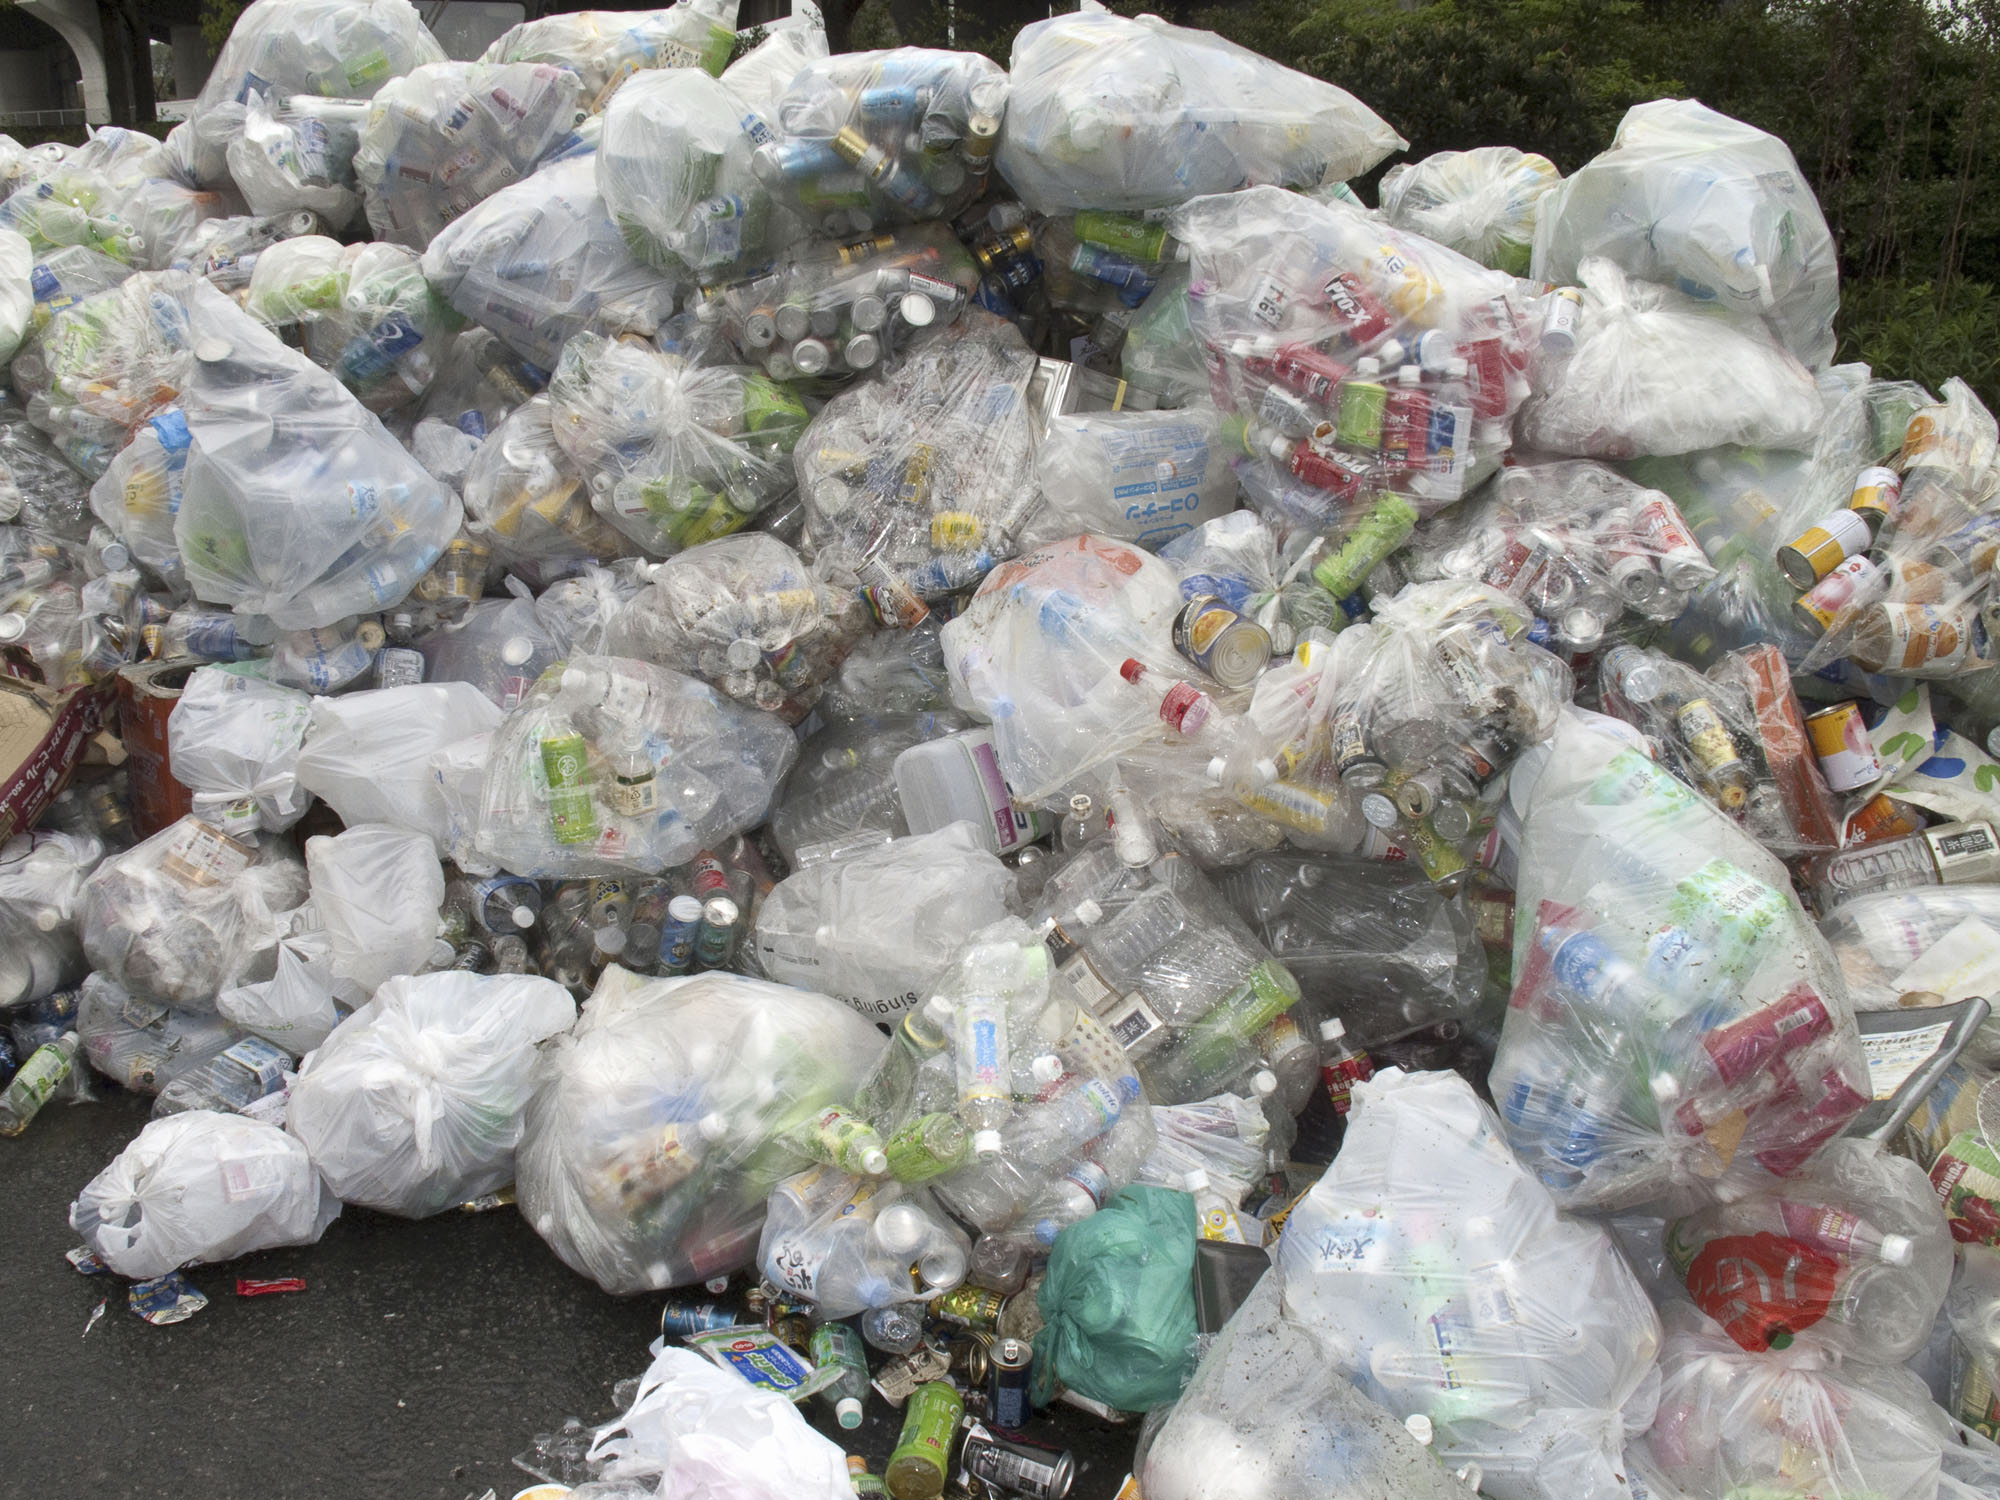 The trash heap has spoken: While official figures show that Japan recycles 84 percent of the plastic it collects, a recent Forbes Japan article argues that the recycling efforts are not exactly what they seem. | GETTY IMAGES